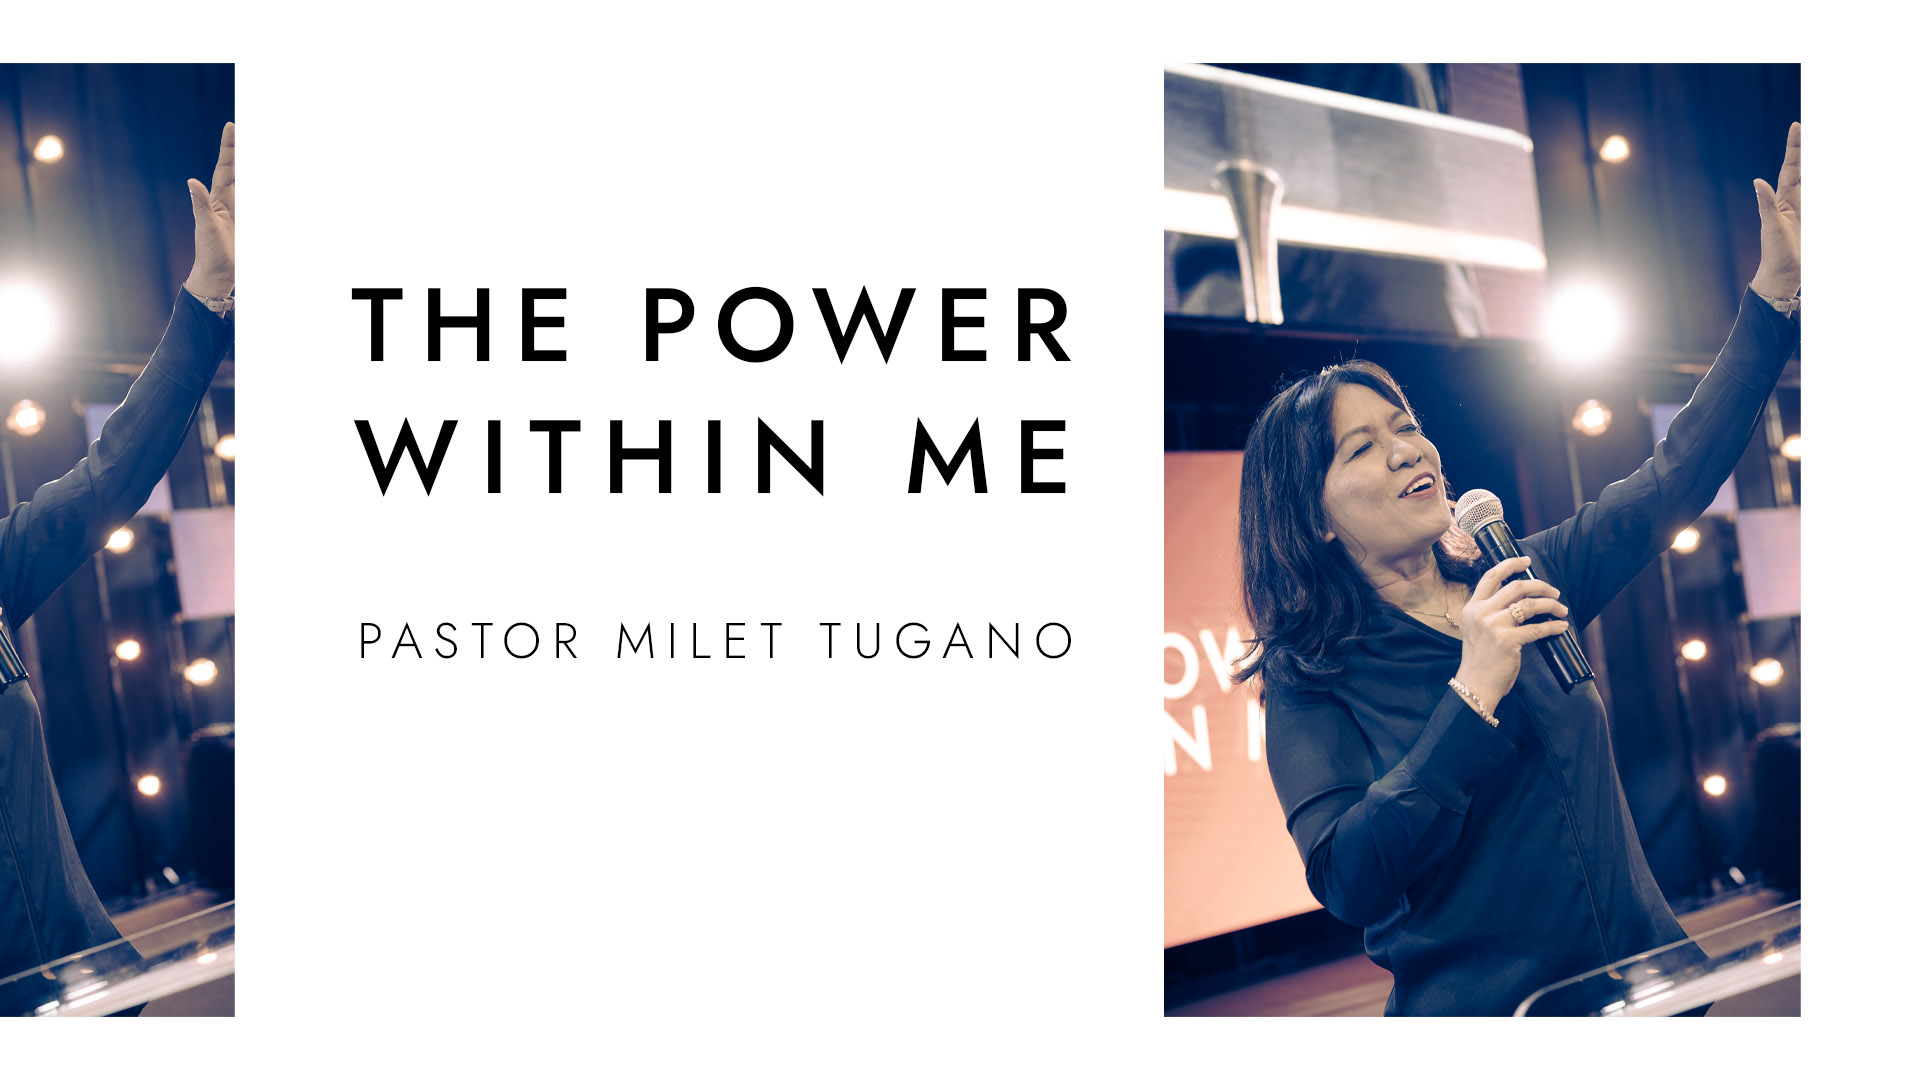 THE POWER WITHIN ME